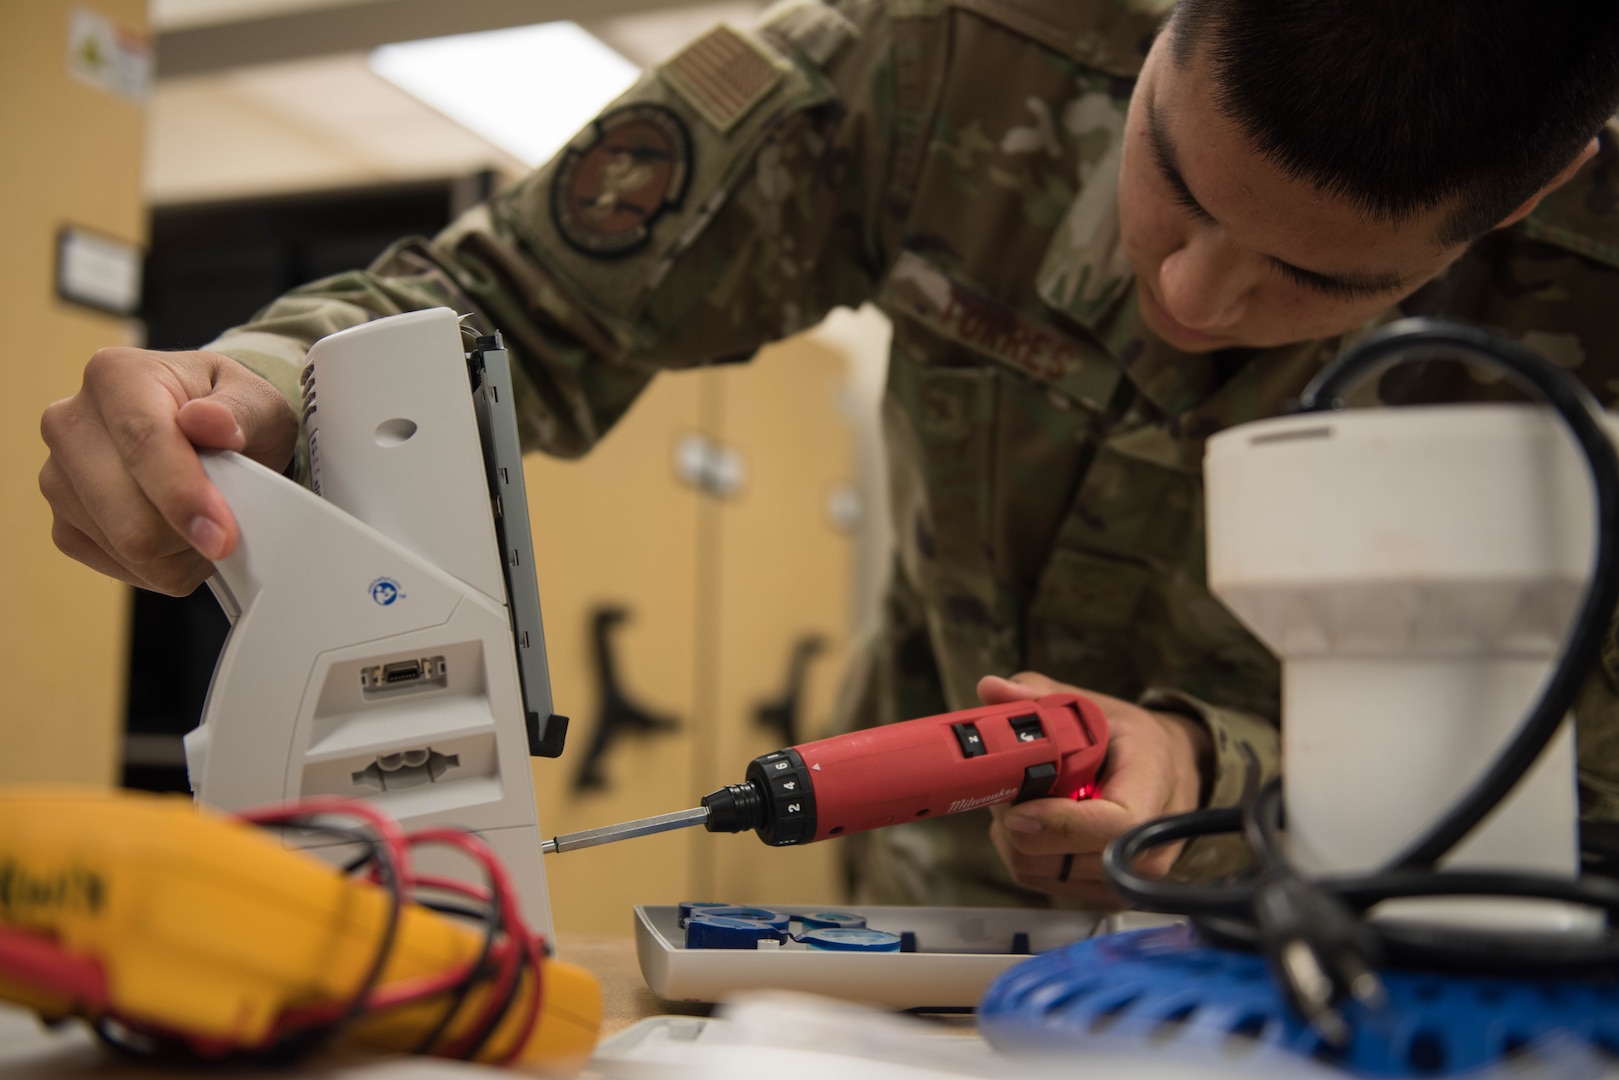 U.S. Air Force Airman 1st Class Timothy Torres, 633rd Medical Group biomedical equipment technician, unscrews a panel on a vital signs monitor at Joint Base Langley-Eustis, Virginia, Nov. 8, 2019. Torres removed the panel so the motor could be repaired. (U.S. Air Force photo by Airman 1st Class Sarah Dowe)